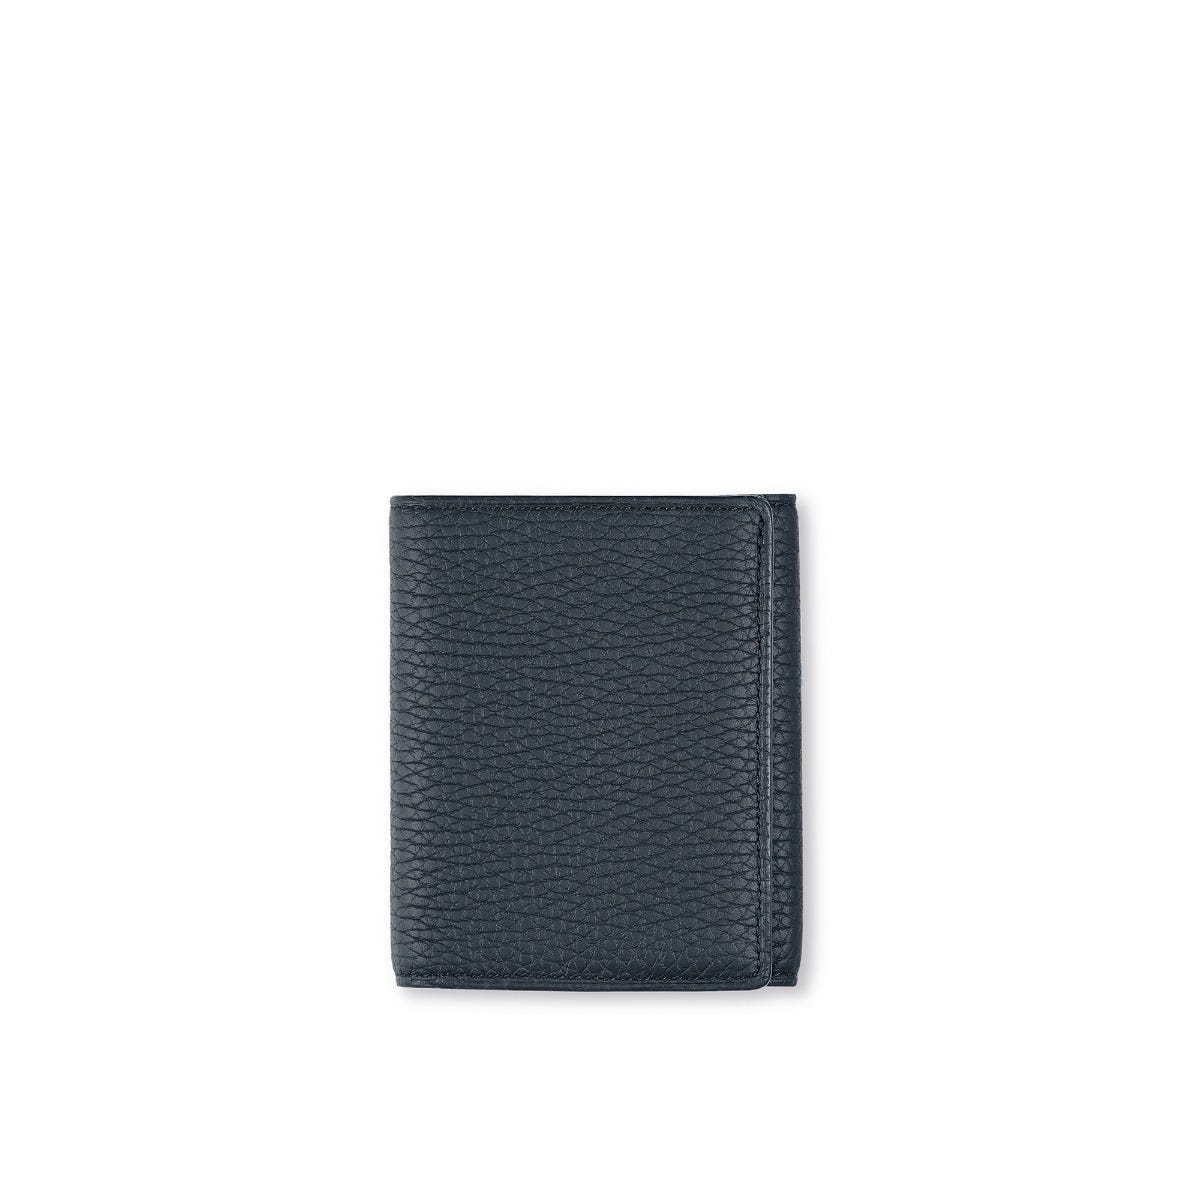 GMT Trifold Wallet in Soft Grain Leather